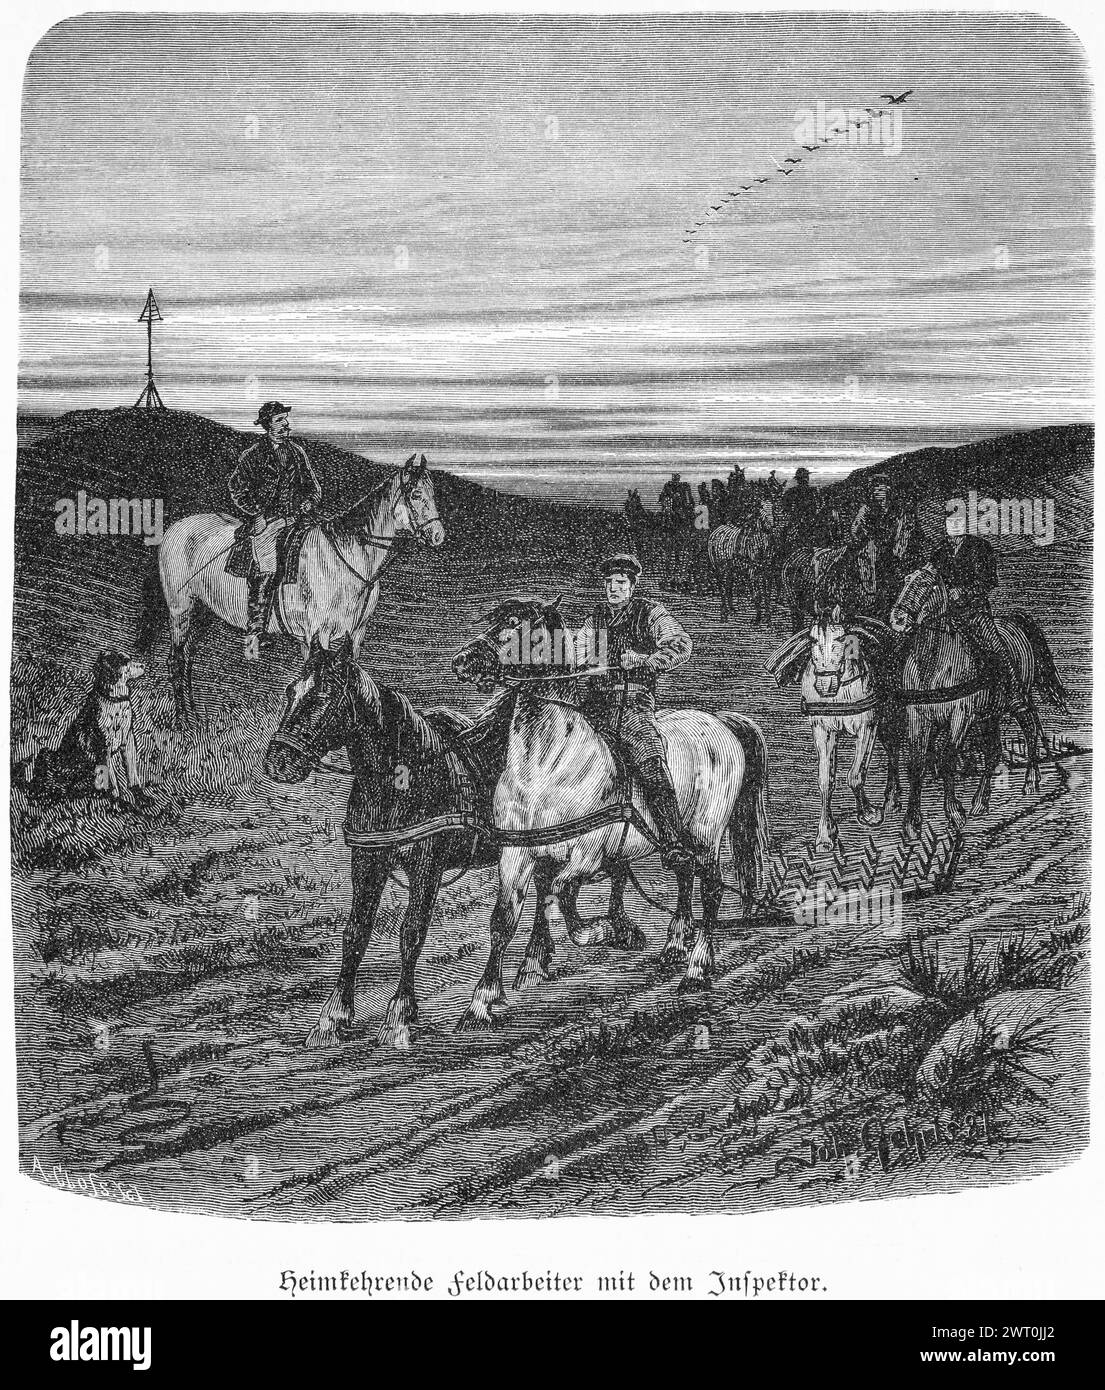 Returning field labourers with the inspector, Mecklenburg-Western Pomerania, Germany, after work, rider, horses, harrow, overseer, historical Stock Photo